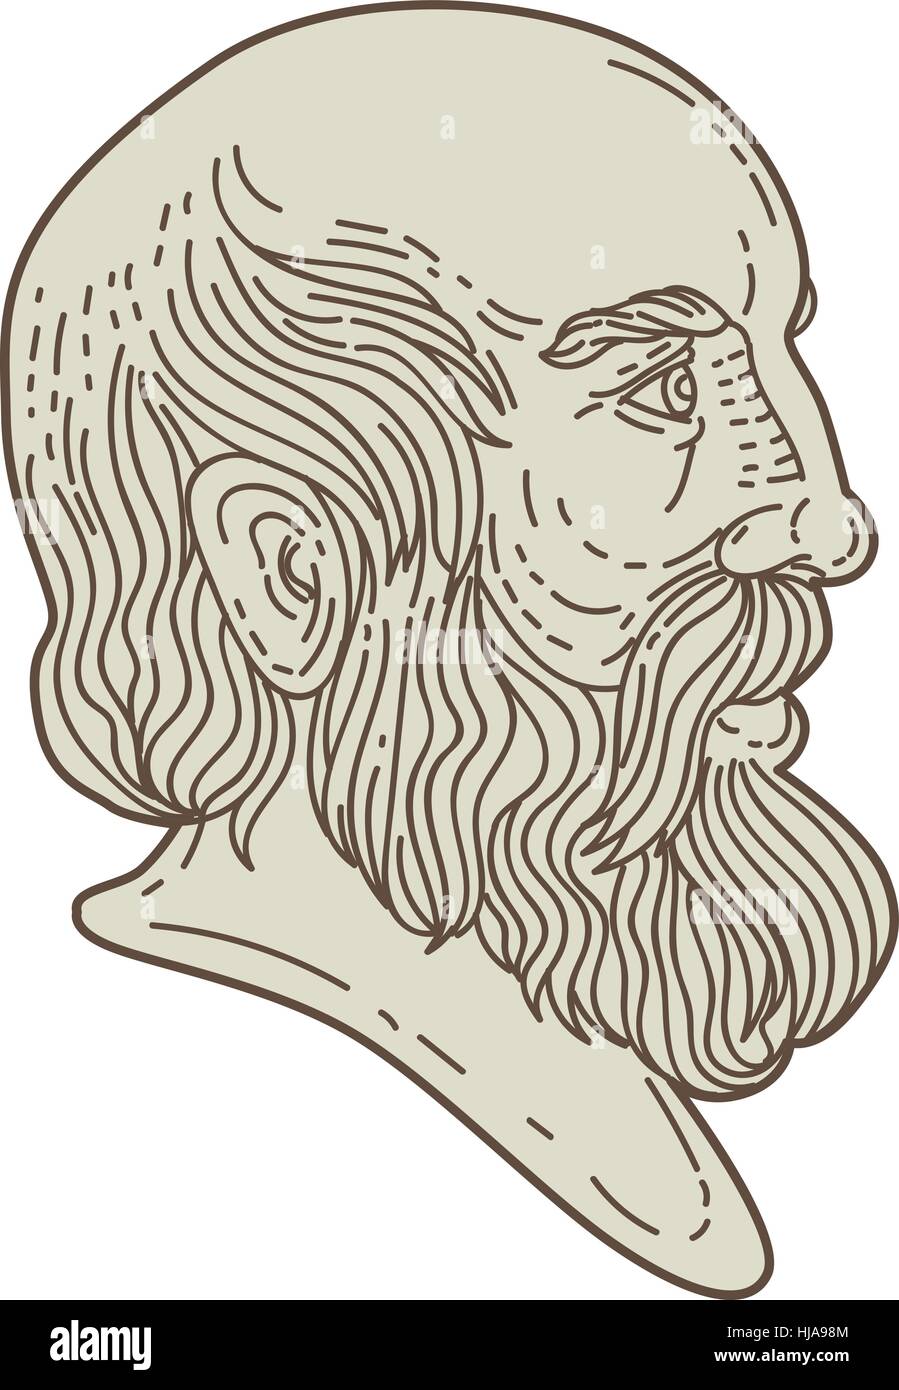 Mono line style illustration of the Greek philosopher Plato head viewed from the side set on isolated white background. Stock Vector